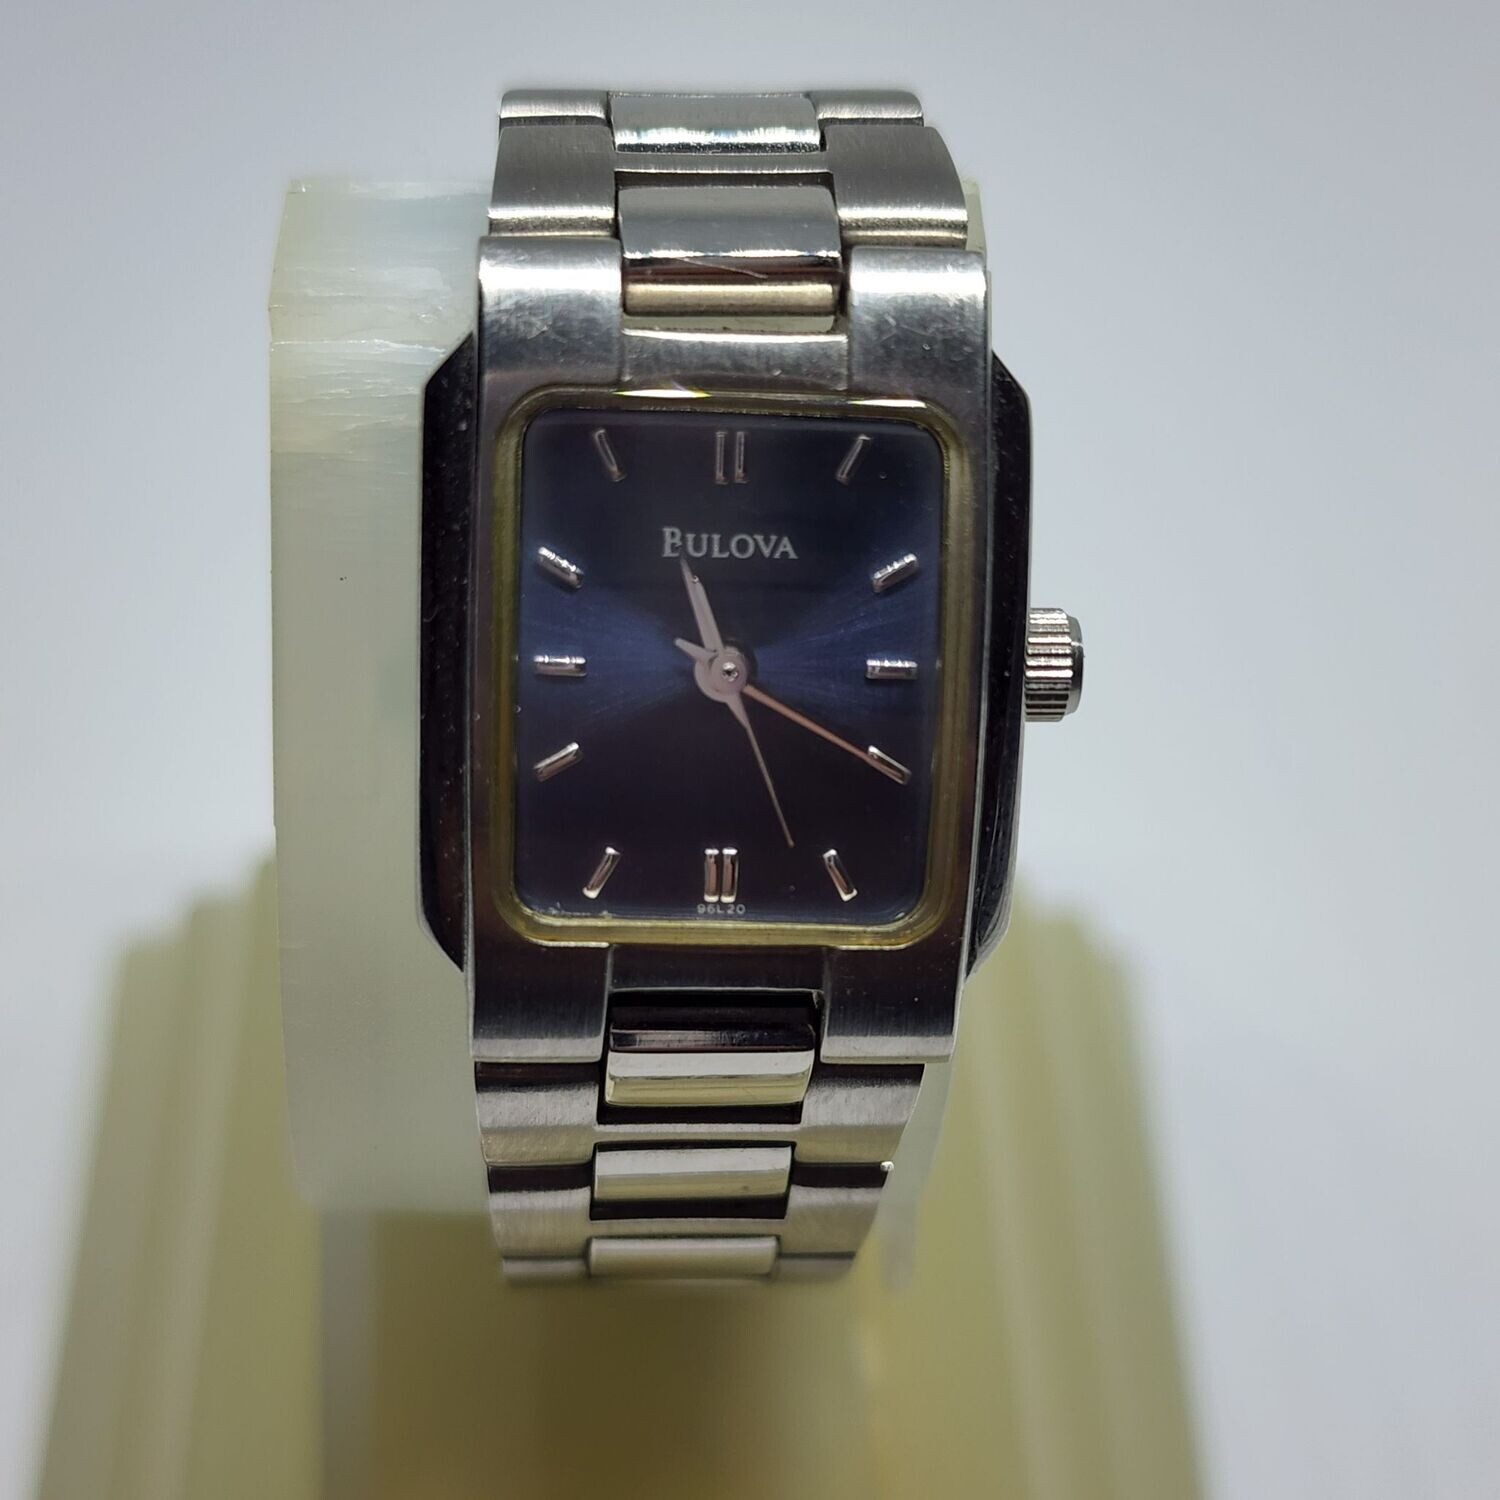 Bulova's Woman's Stainless Steel Quartz Watch with Satin Blue Dial c. 1990's